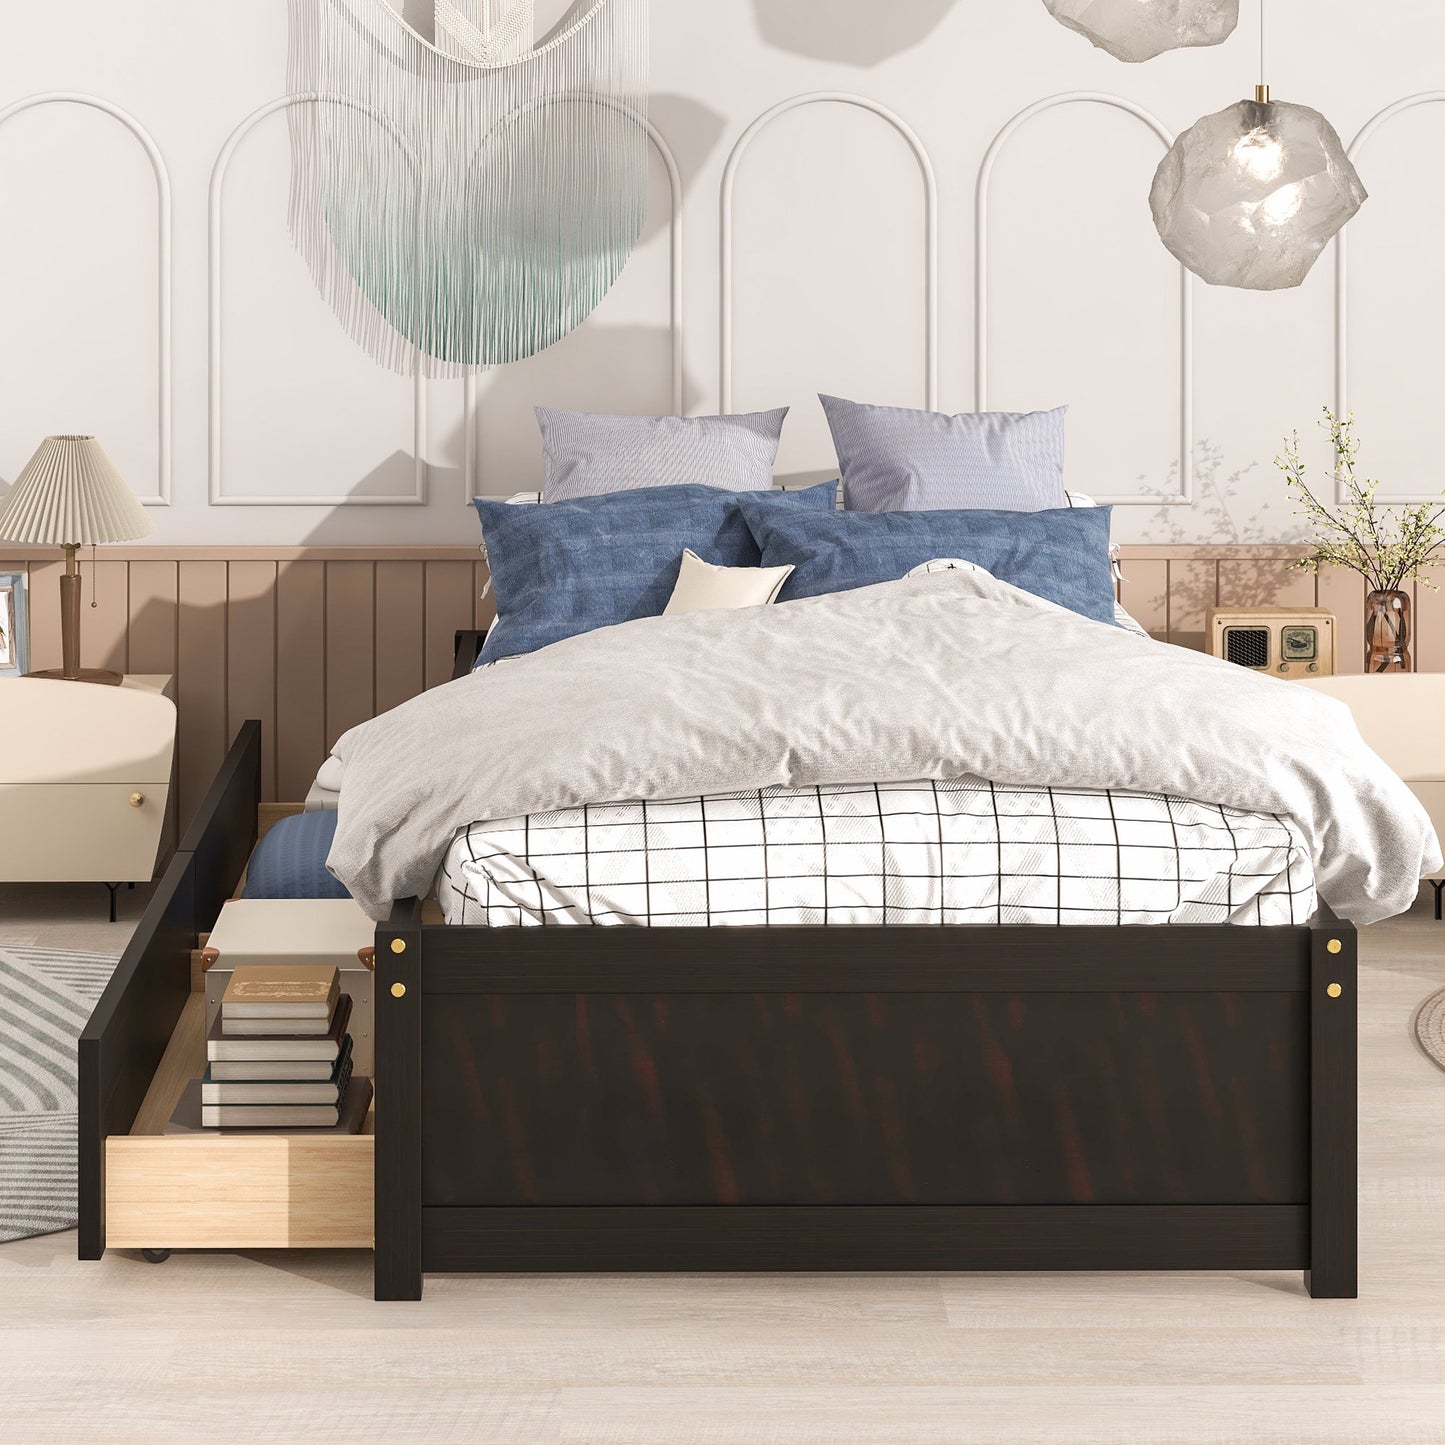 SYNGAR Espresso Wood Twin Platform Bed Frame with Storage, Solid Pine Wood Kids Bed Frame with 2 Storage Drawers, No Box Spring Needed